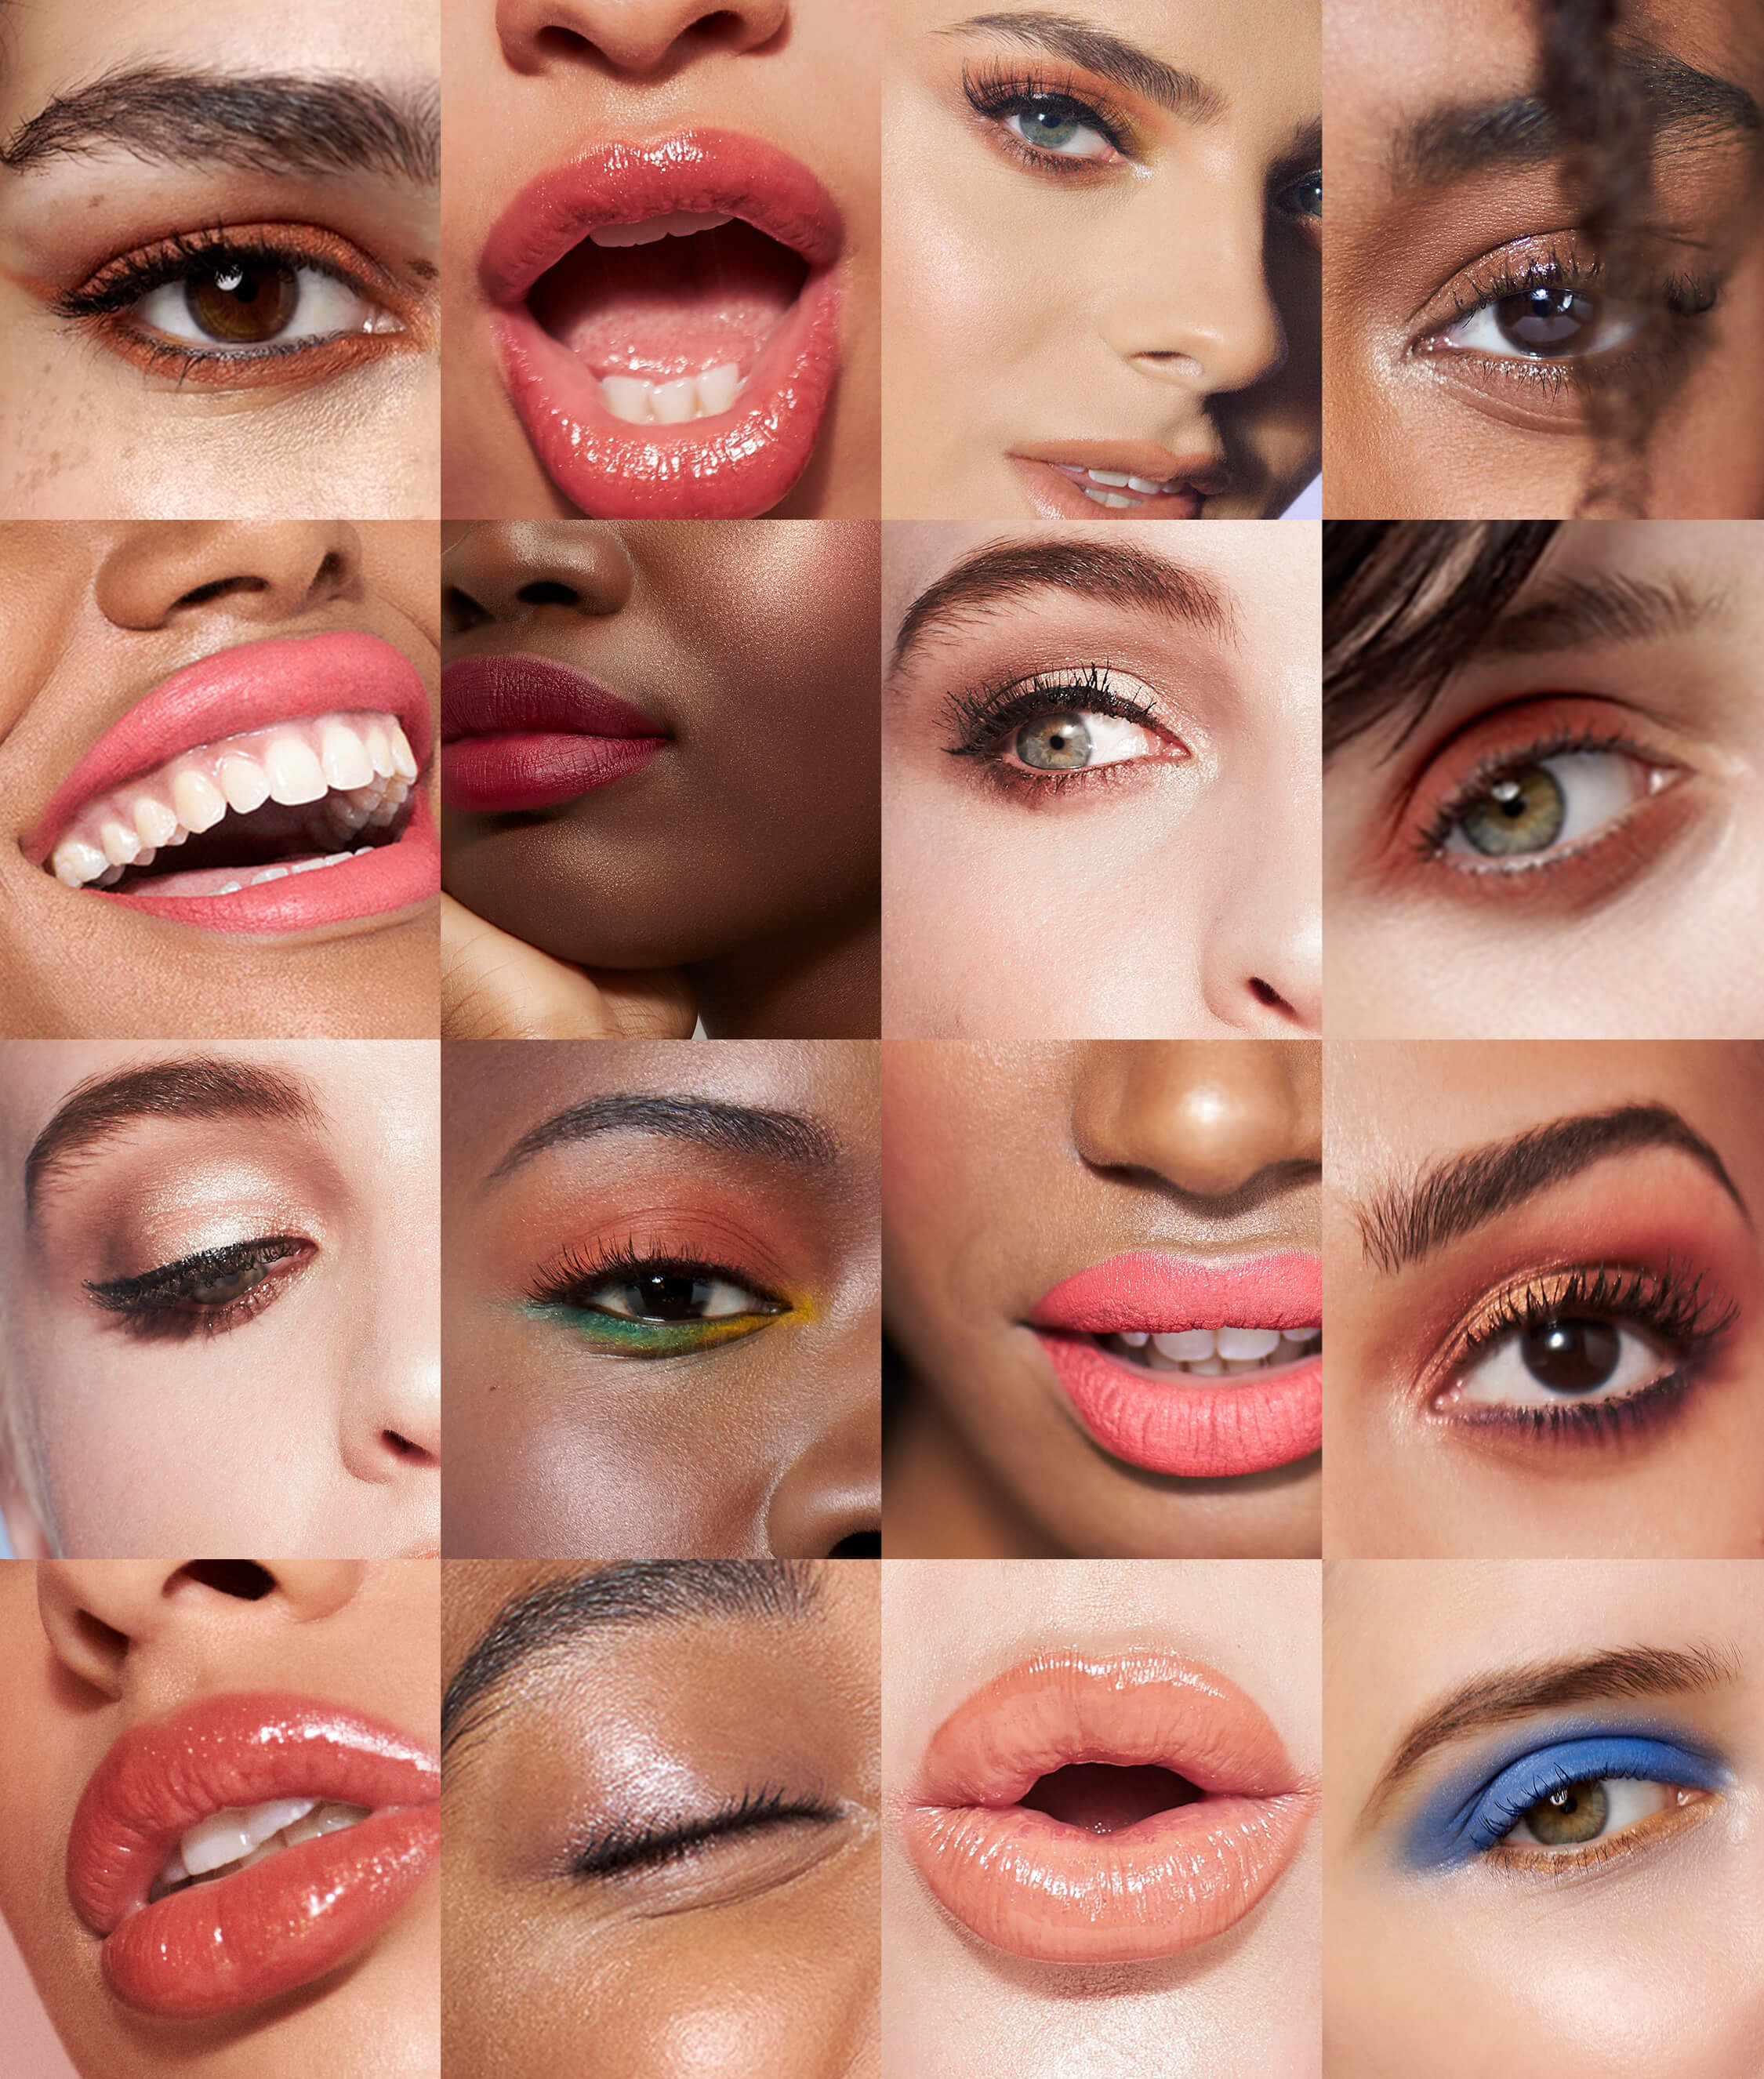 Collage of different men and women showing eyes, lips and face